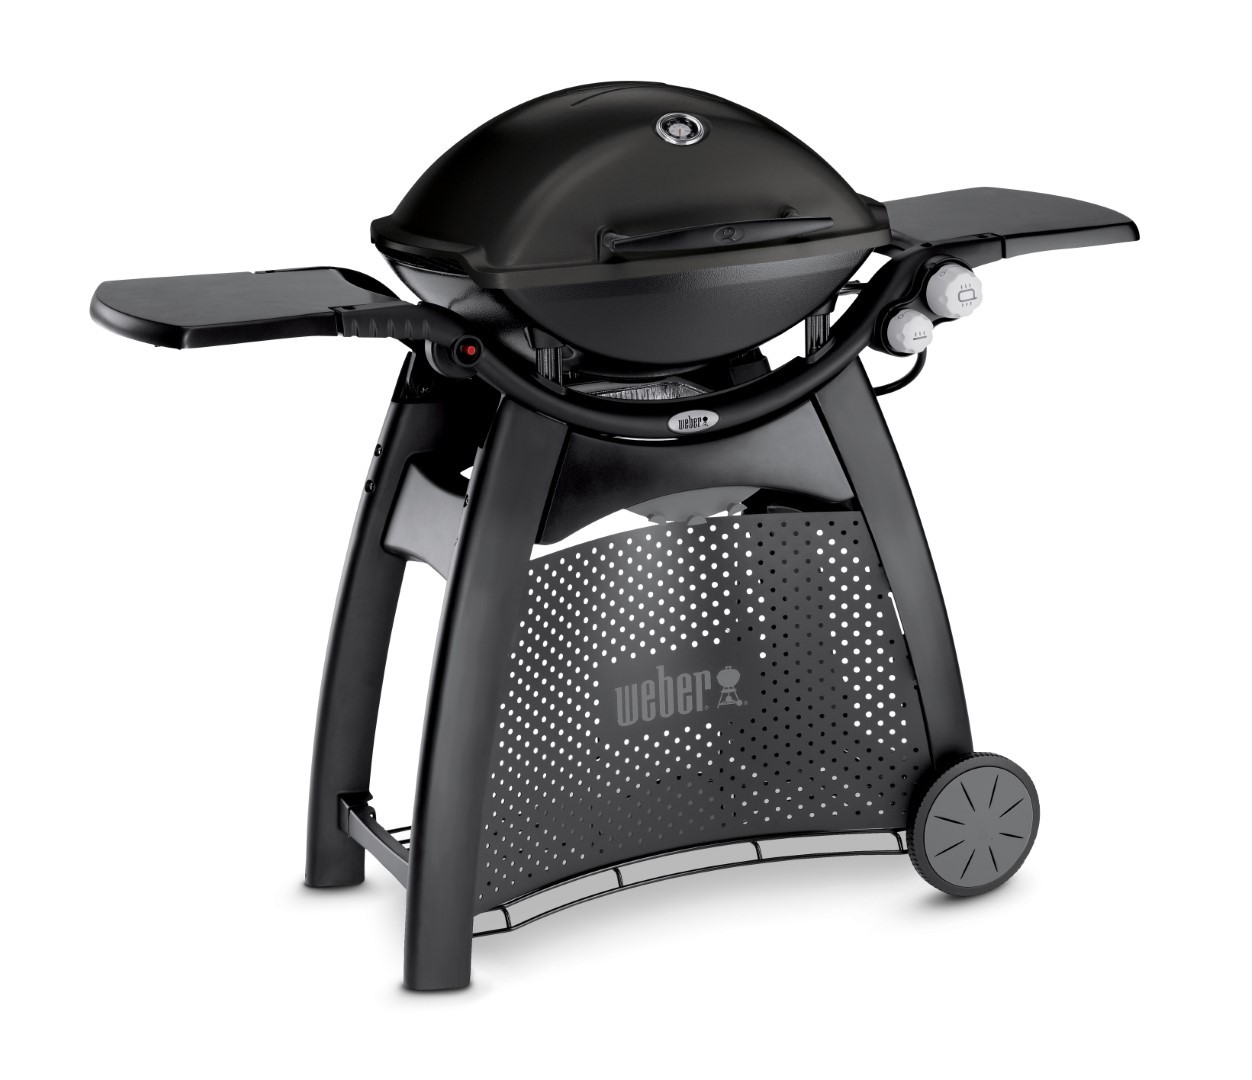 https://www.warentuin.nl/media/catalog/product/1/7/1770077924027512_weber_gas_barbecue_gas_barbecue_q_3000_black_station_weber_ac74.jpg